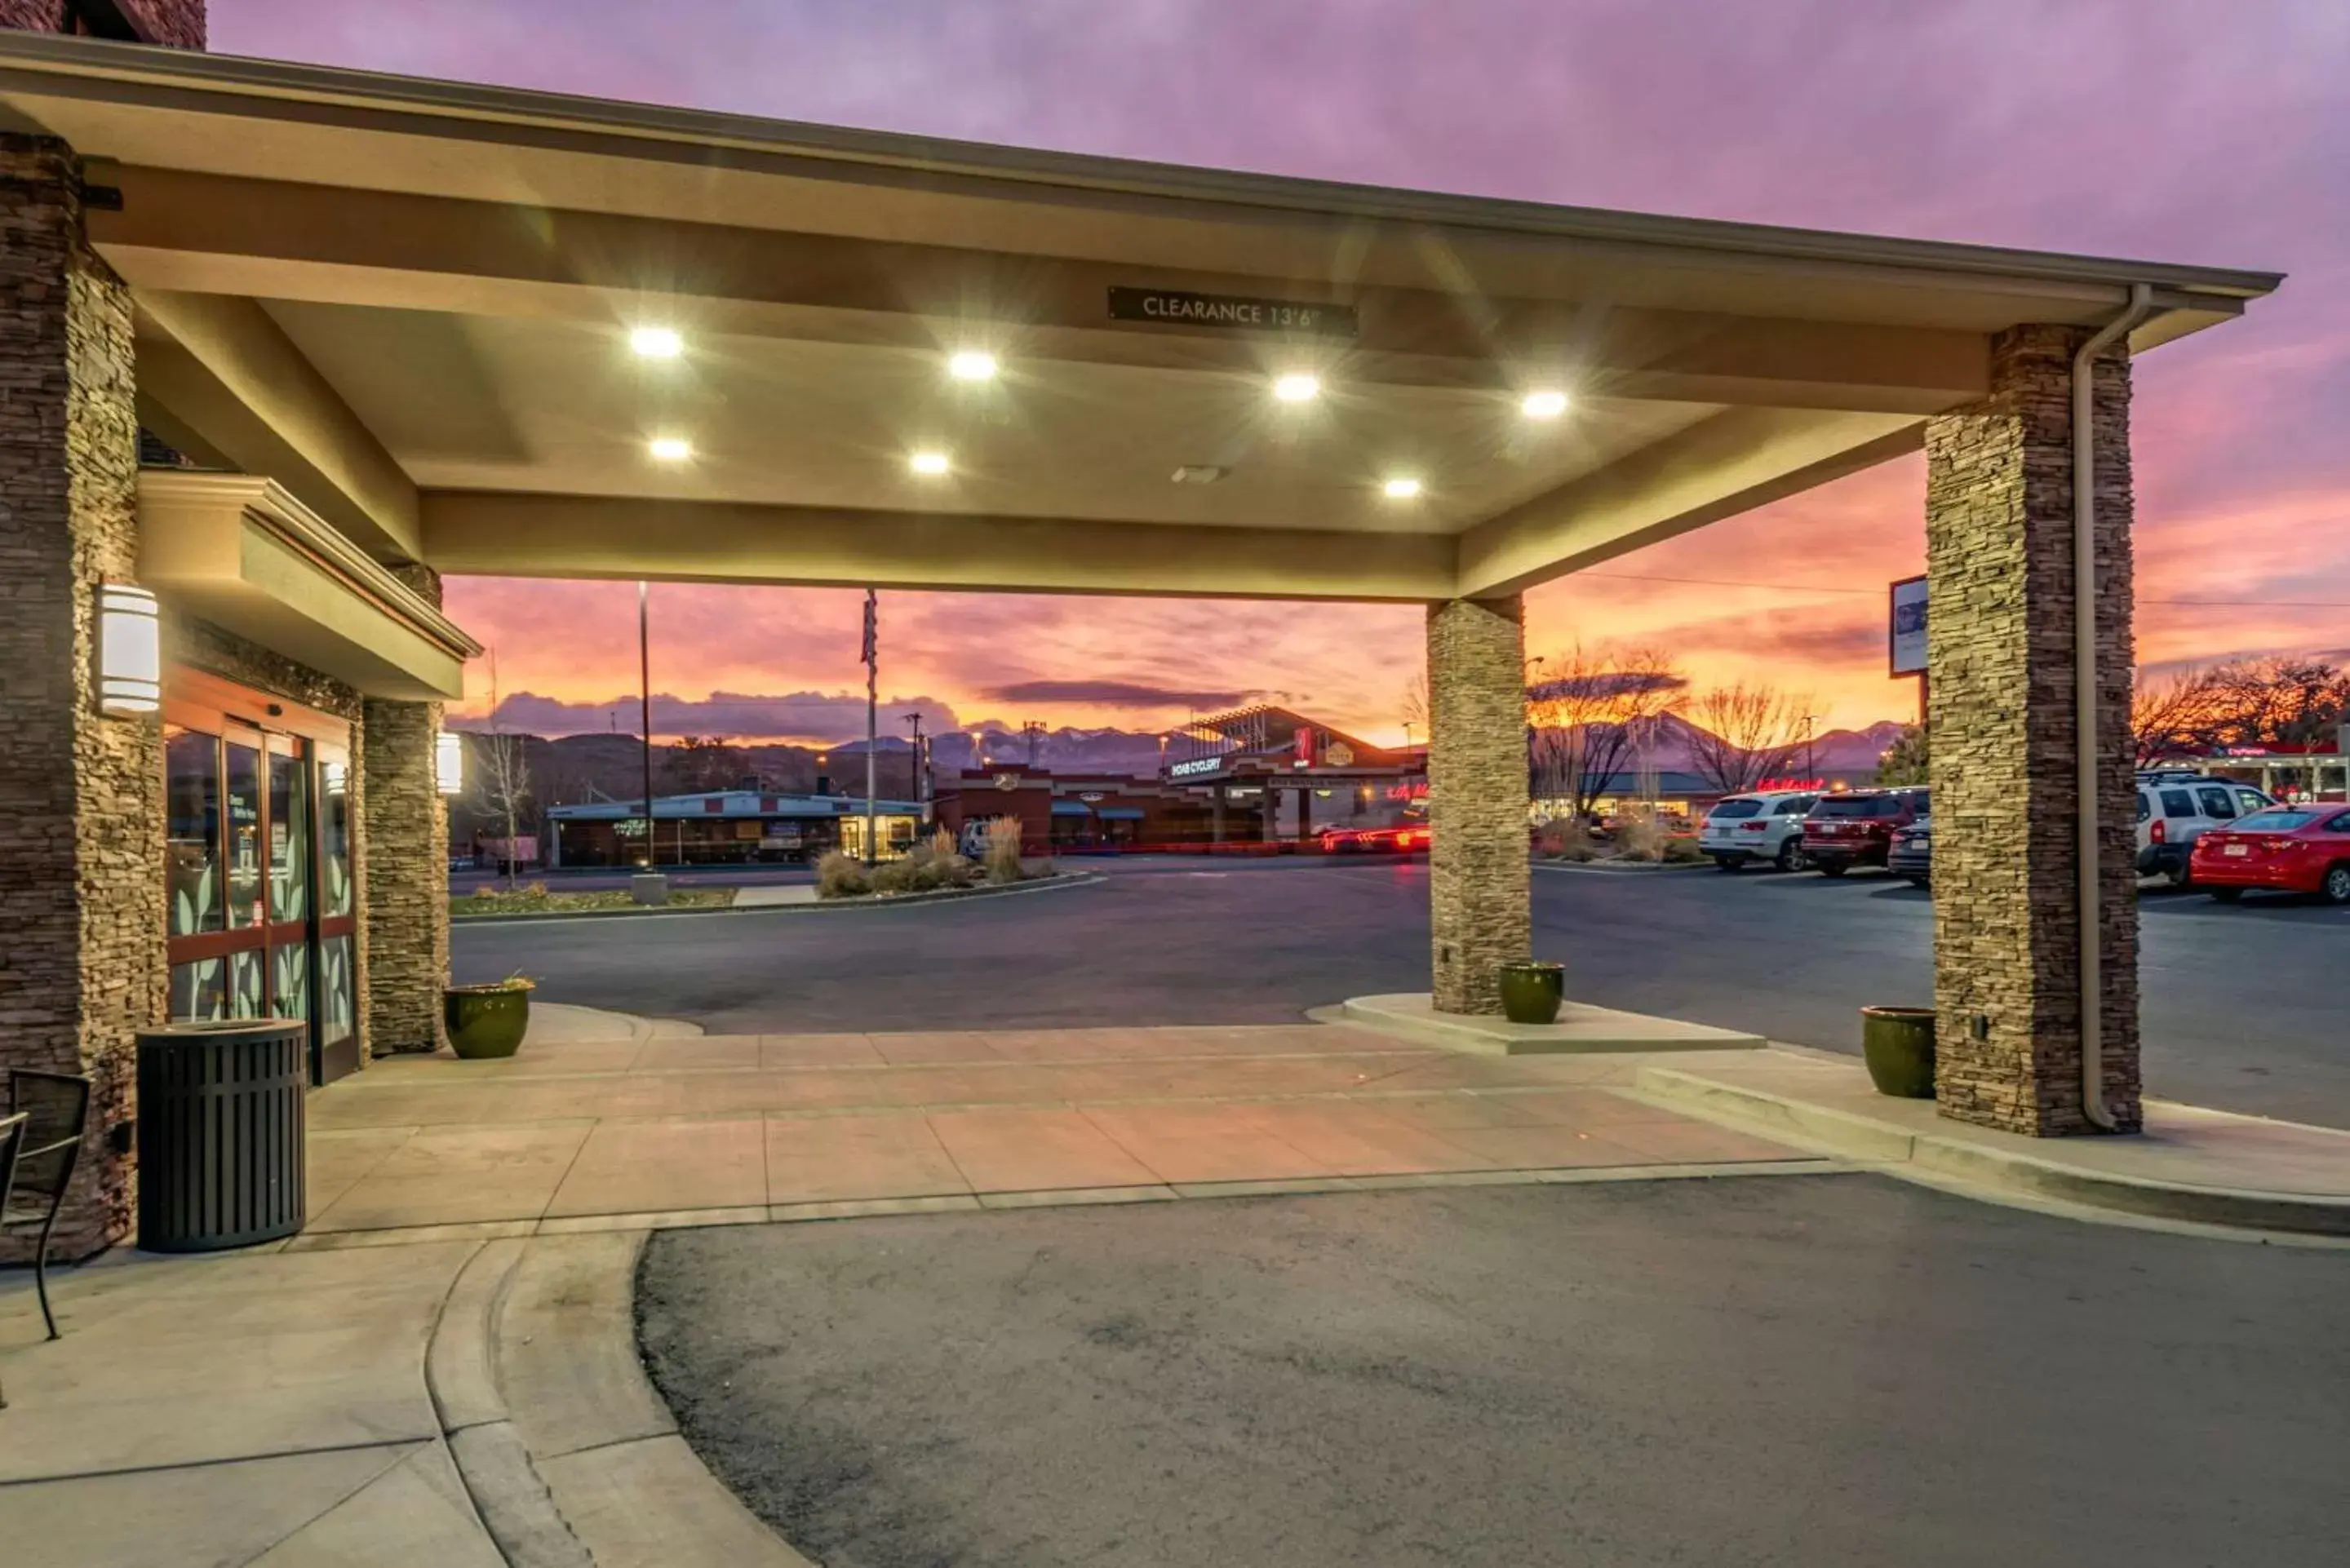 Property building in Sleep Inn & Suites Moab near Arches National Park